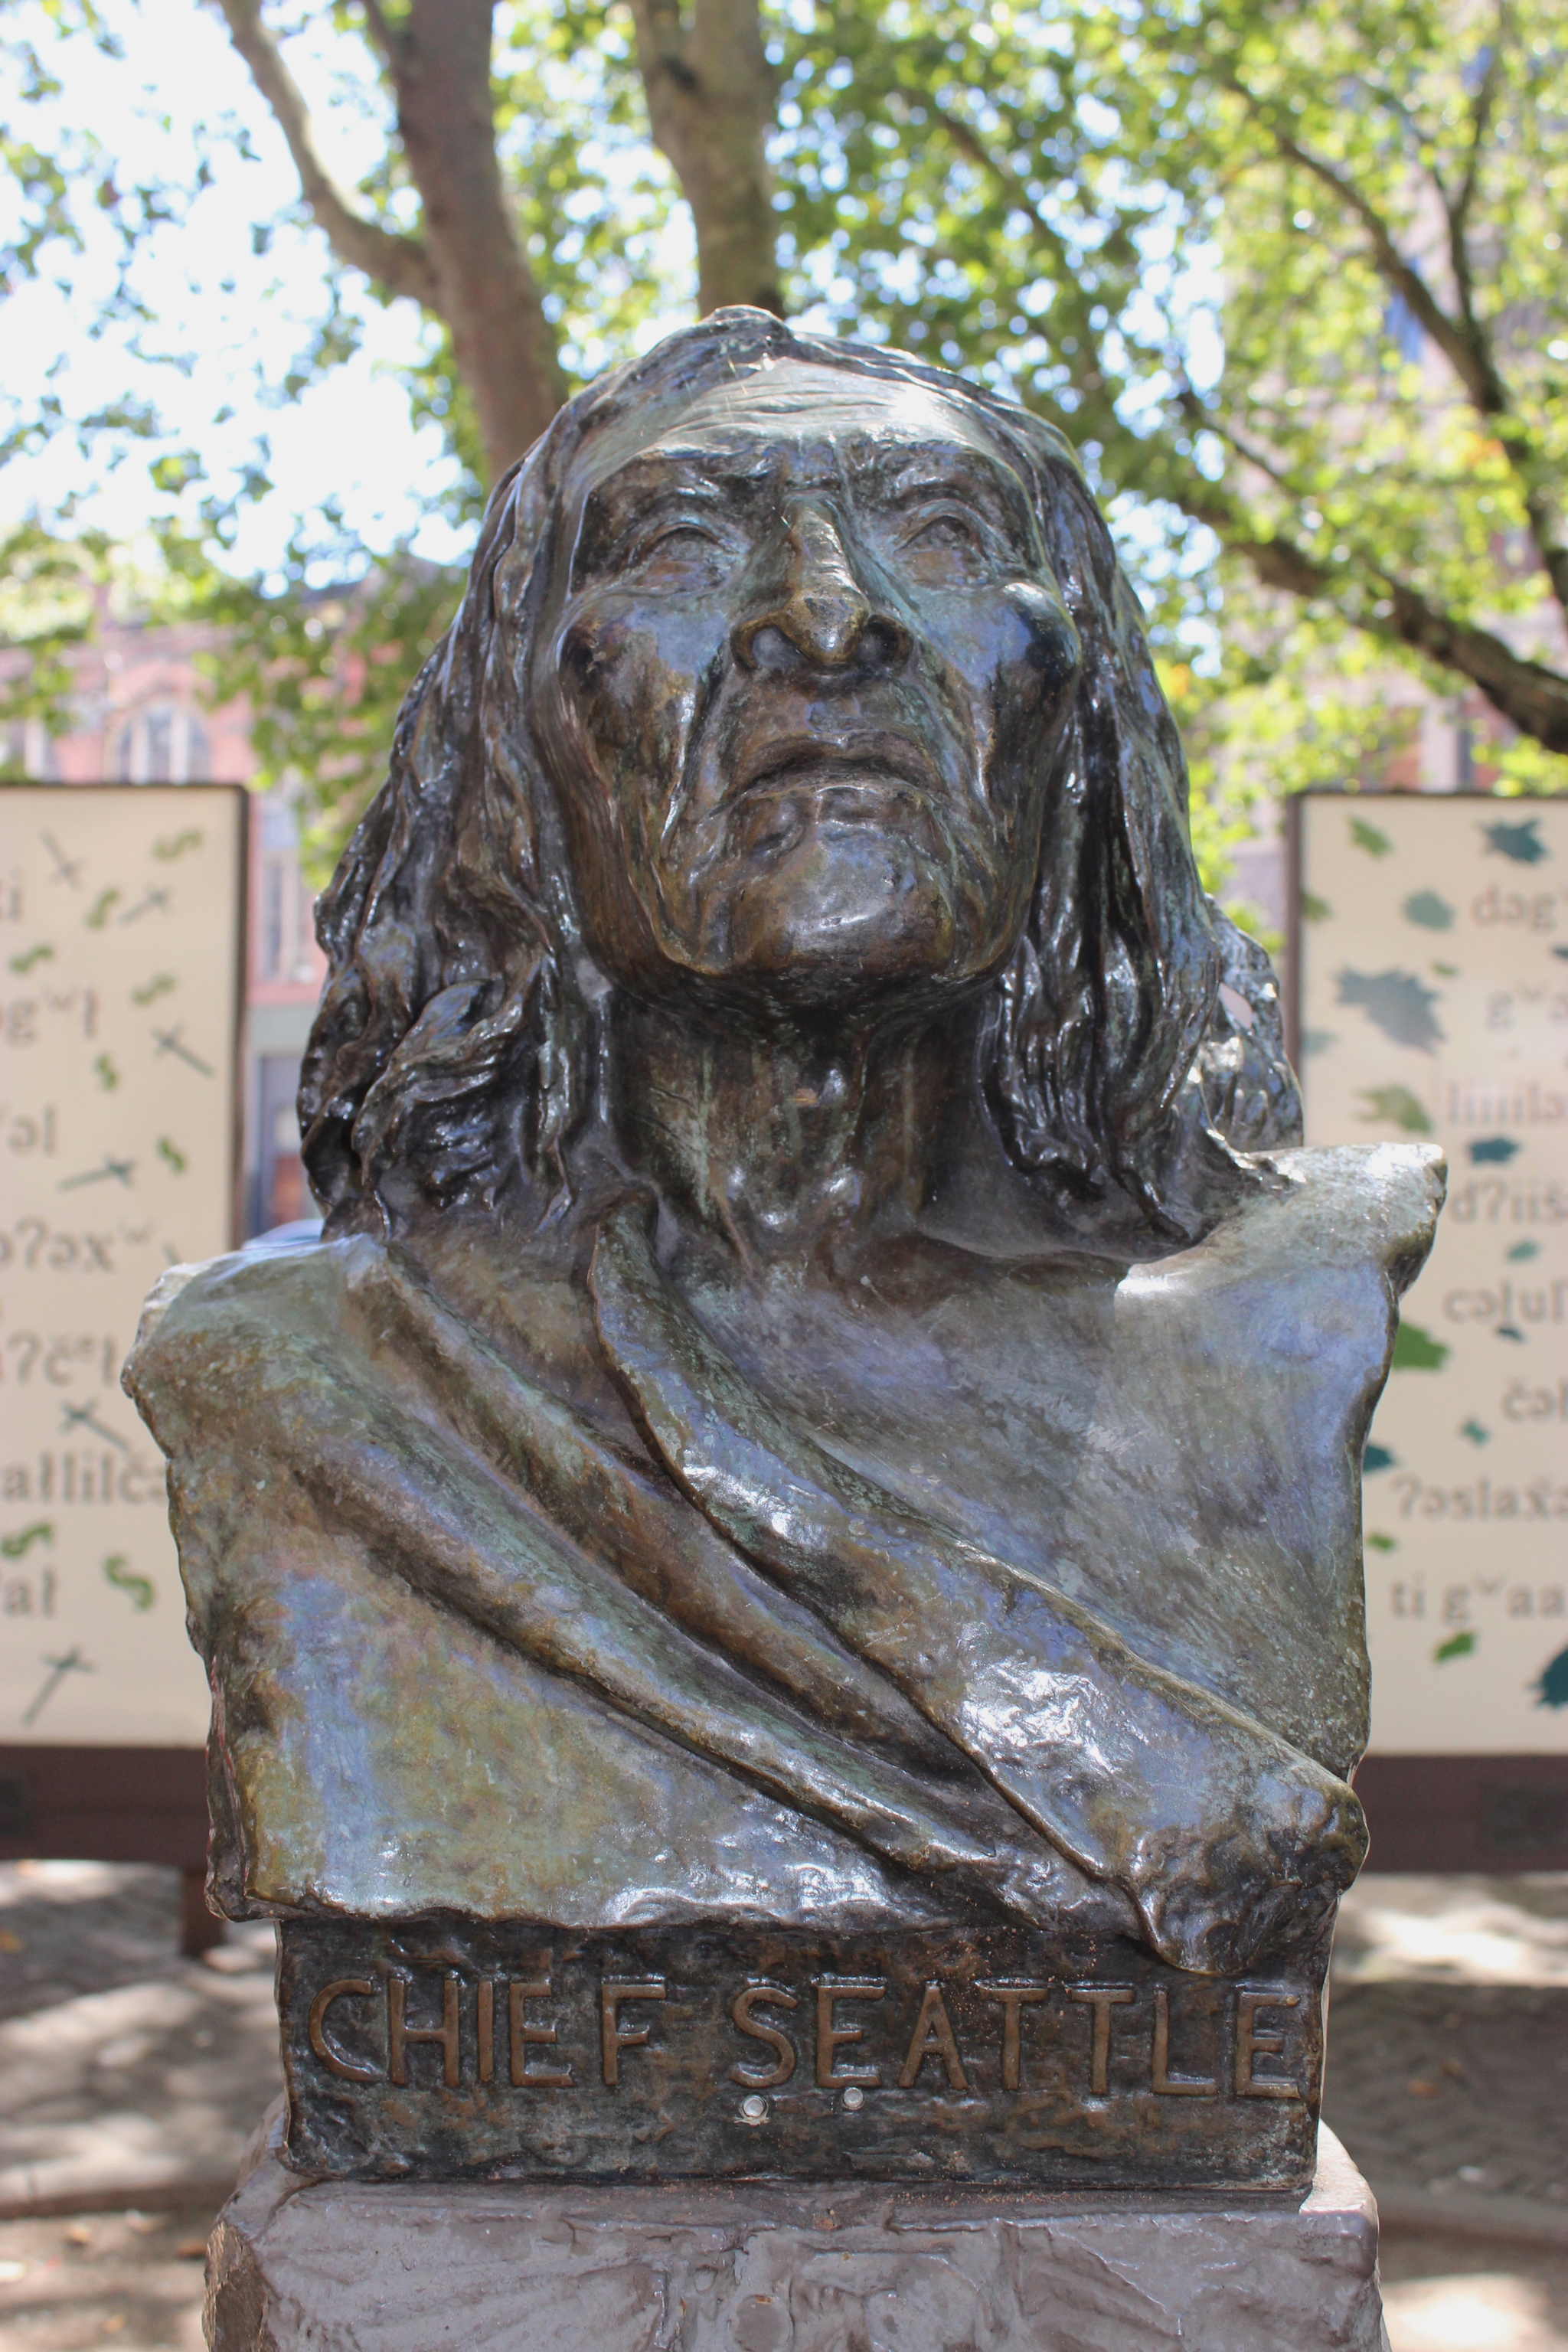 A bust of Duwamish Chief Si’ahl, better known by his anglicized name Chief Seattle. Photo by Kelton Sears